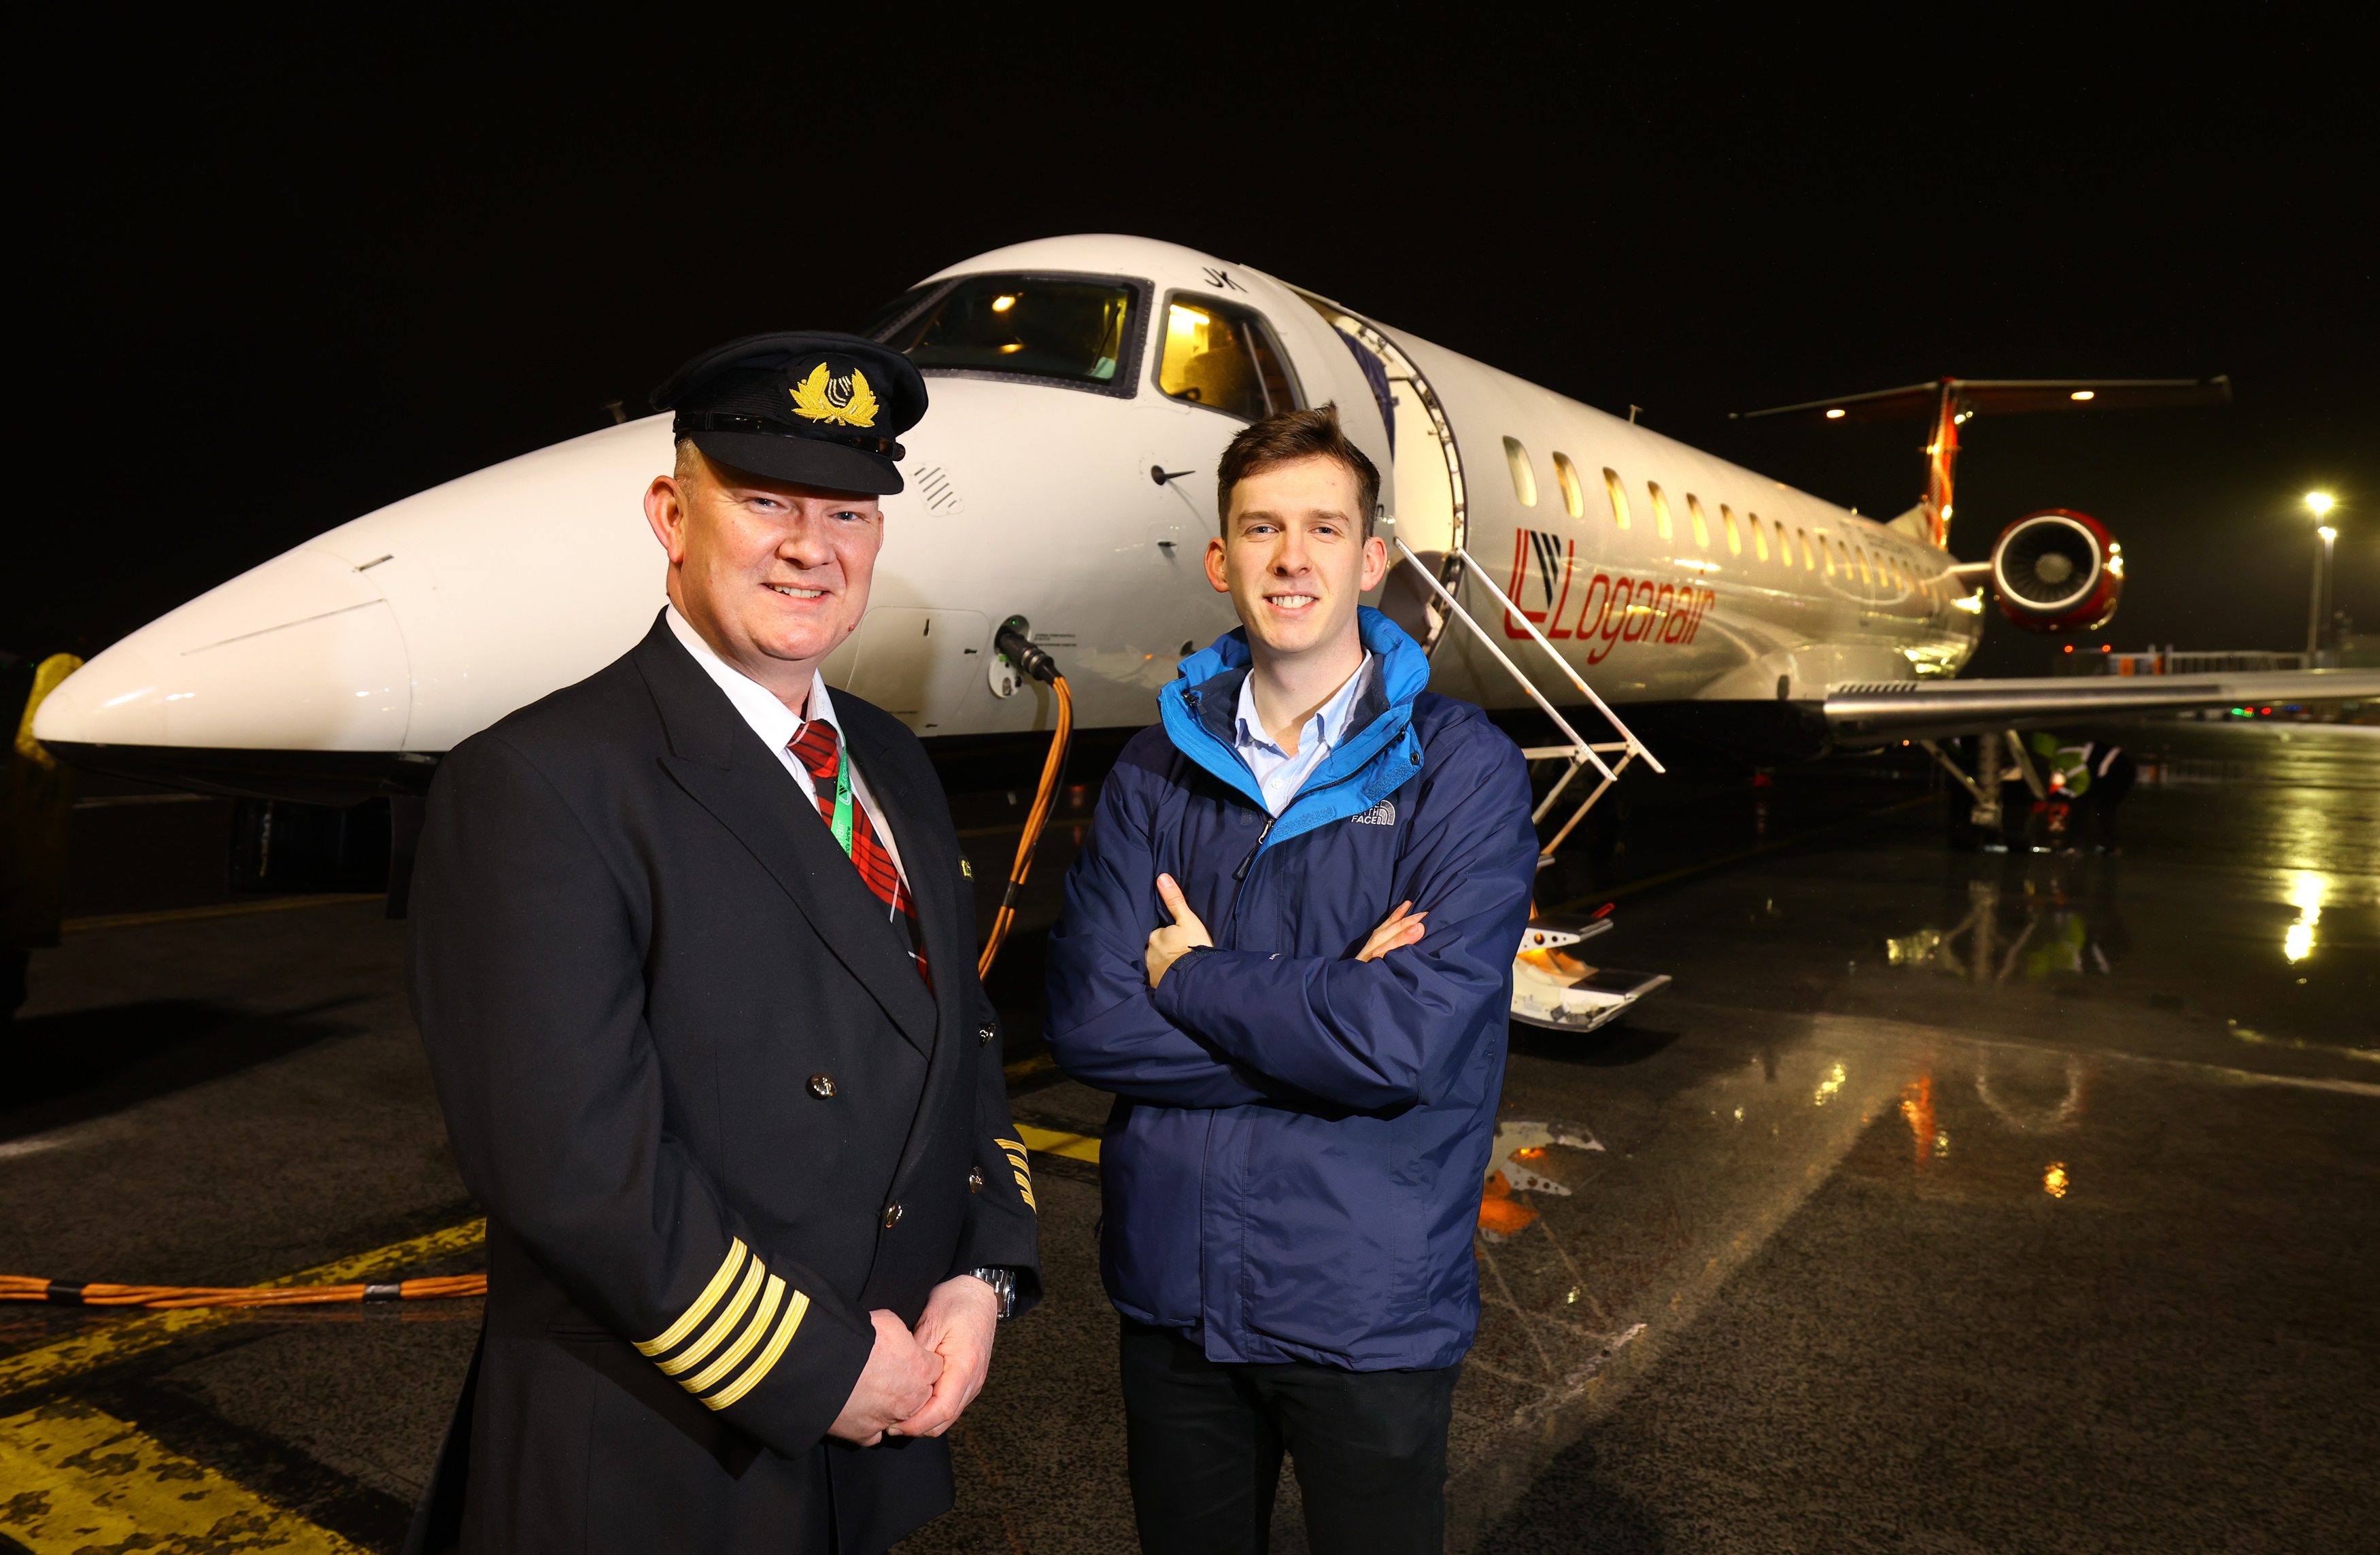 Loganair keeps it in the family as father and son inspire each other to pursue dream aviation careers